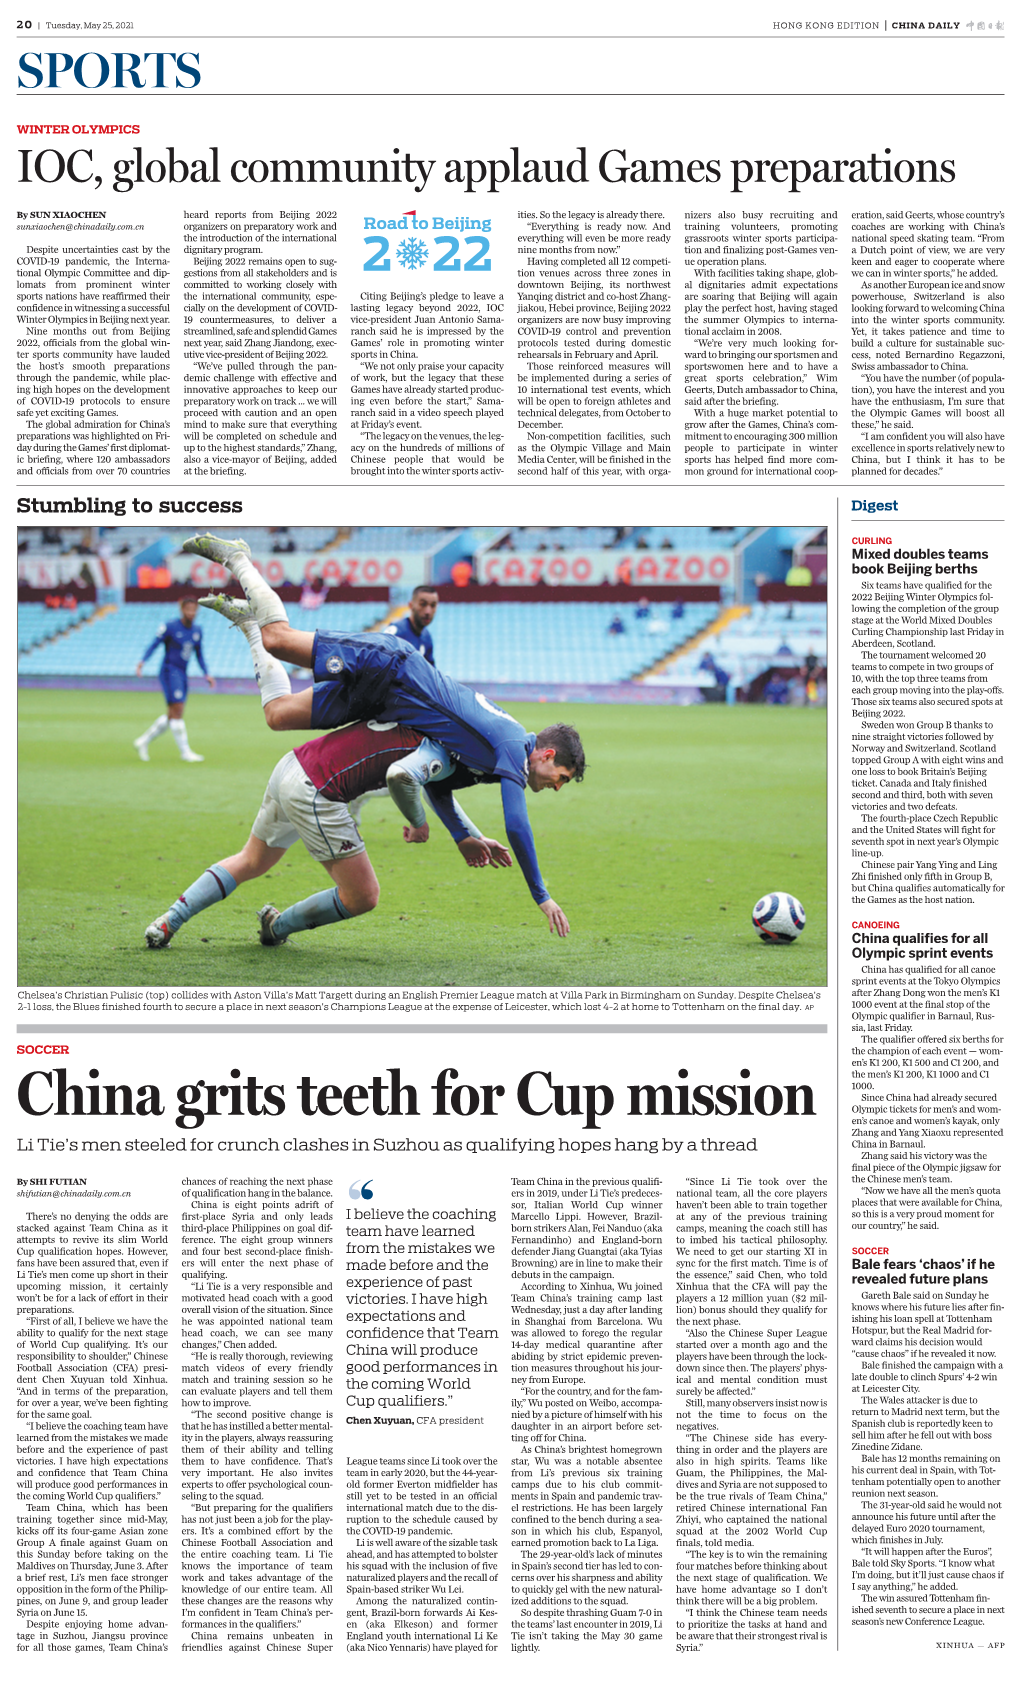 China Grits Teeth for Cup Mission